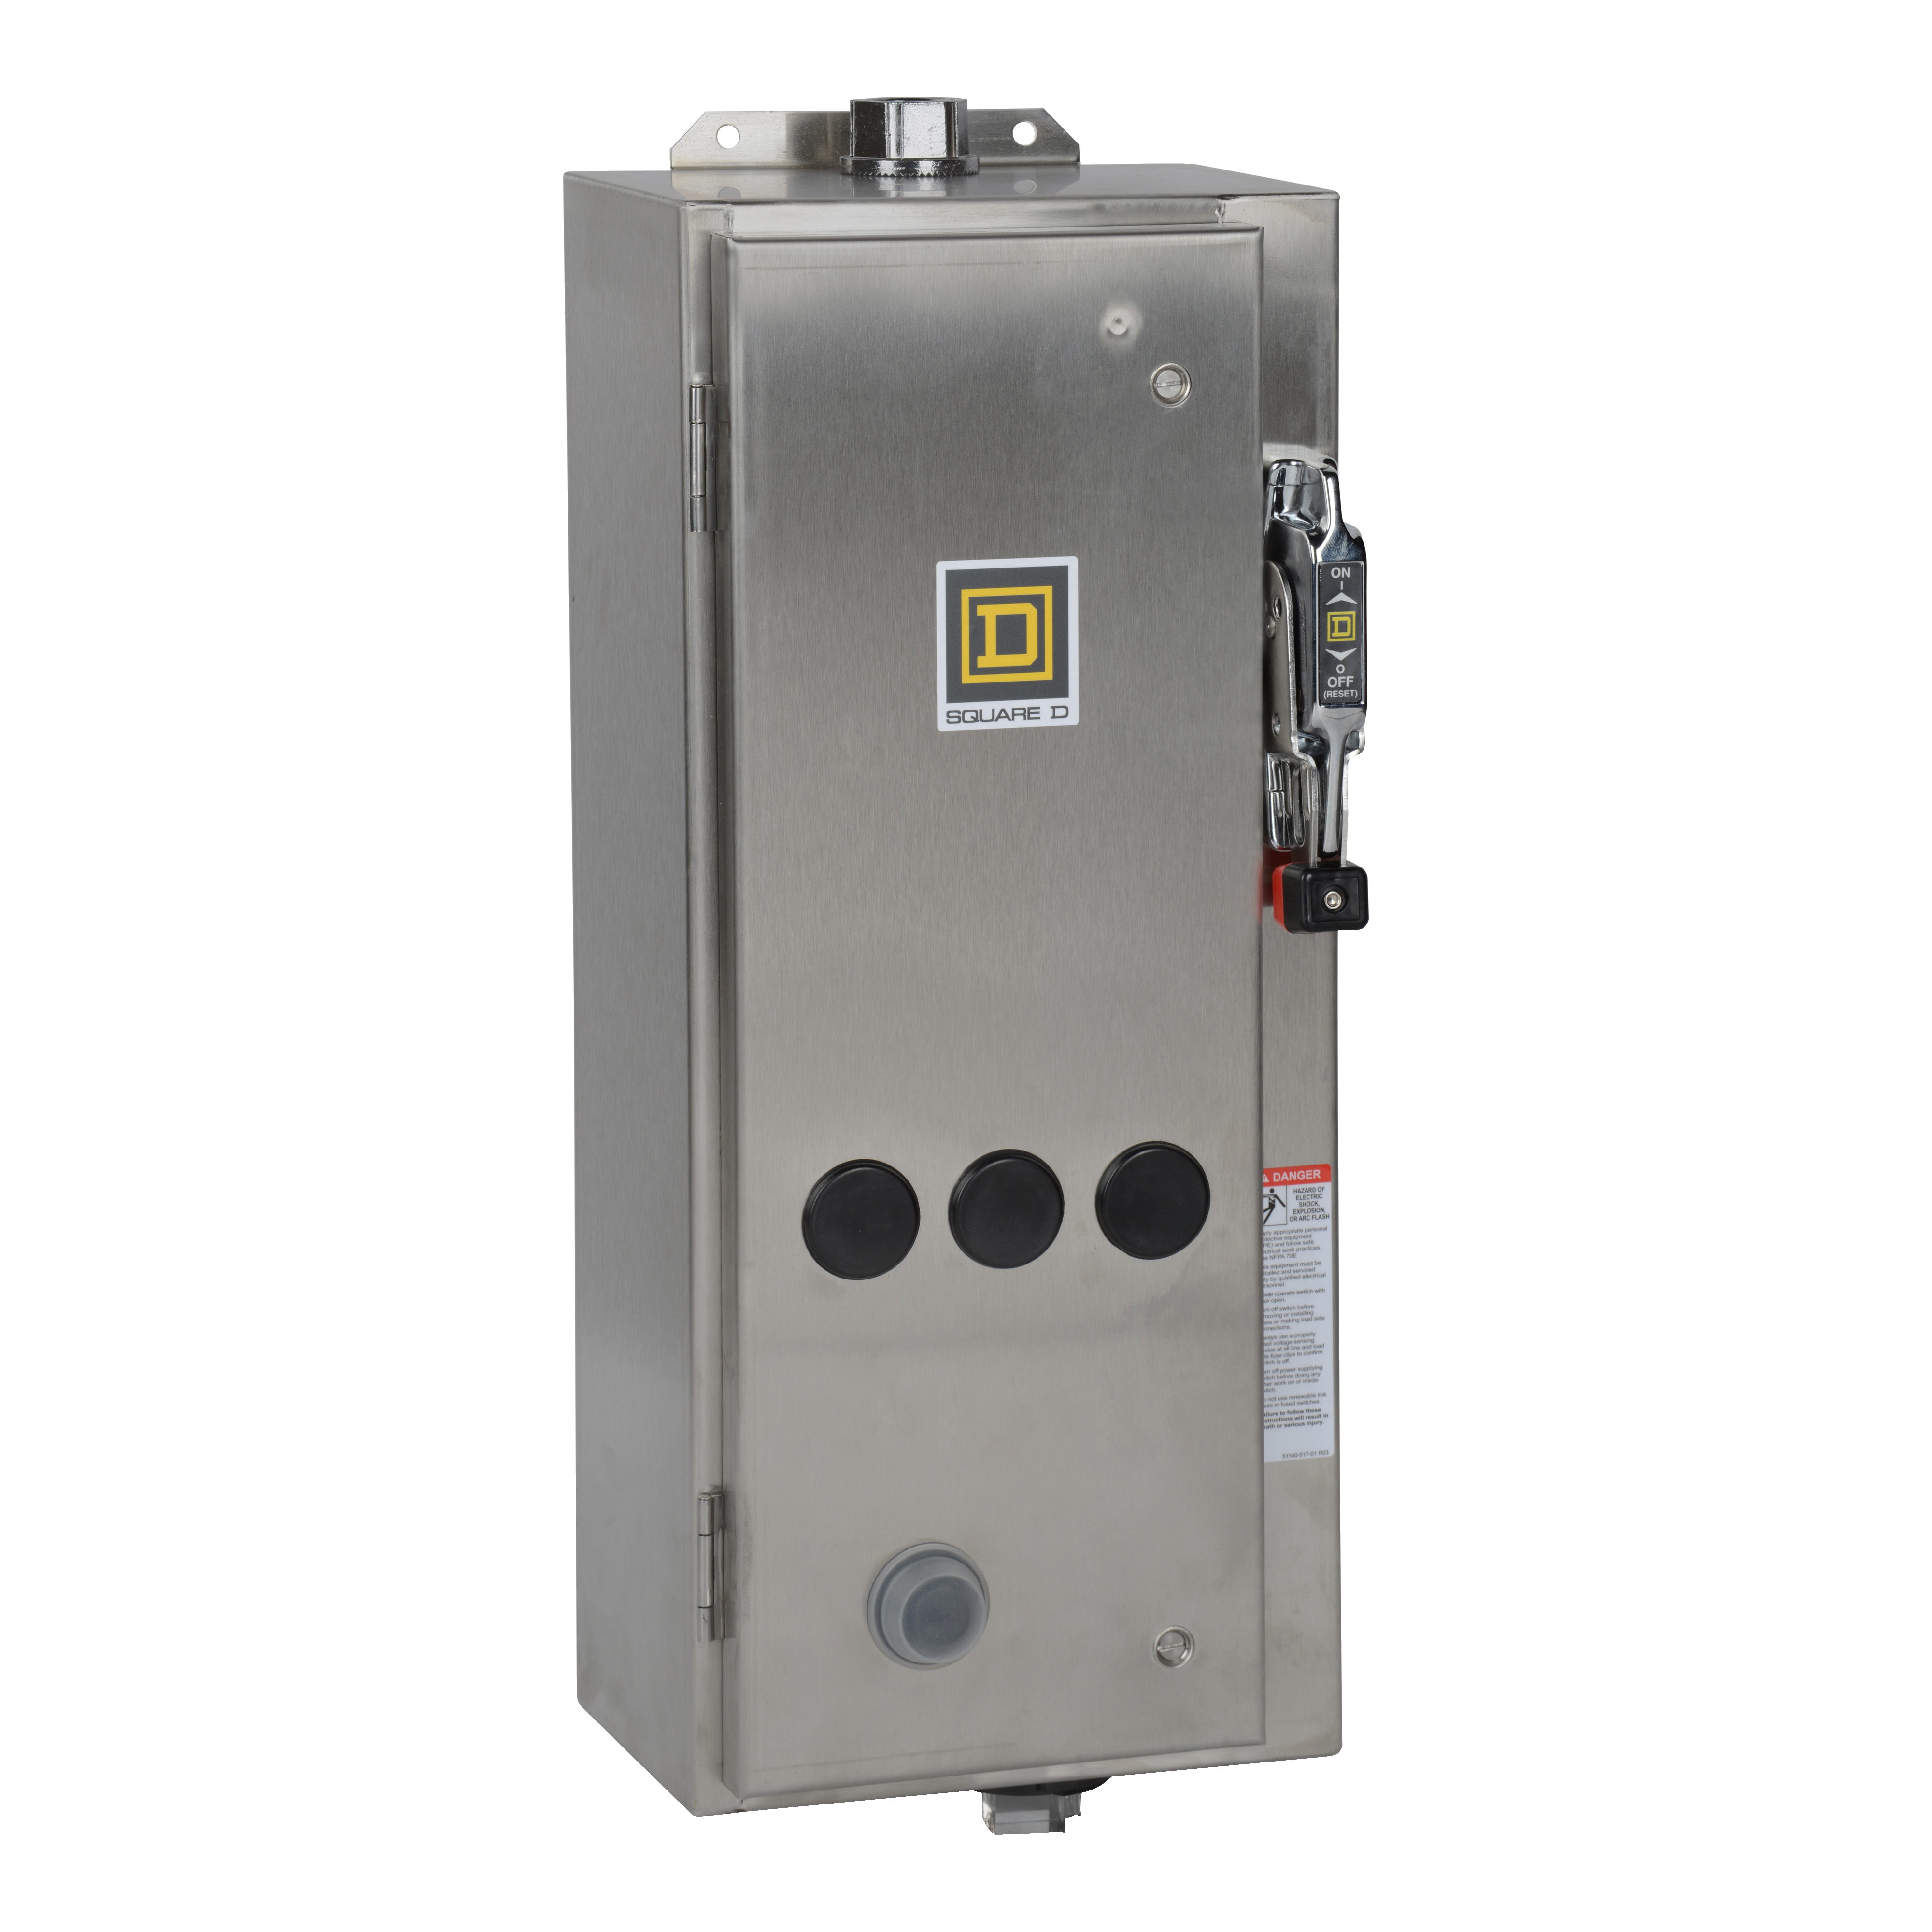 NEMA Combination Starter, Type S, 30A fusible disconnect, Size 0, 18A, 3 HP at 240 VAC polyphase, 240VAC coil, NEMA 4/4X